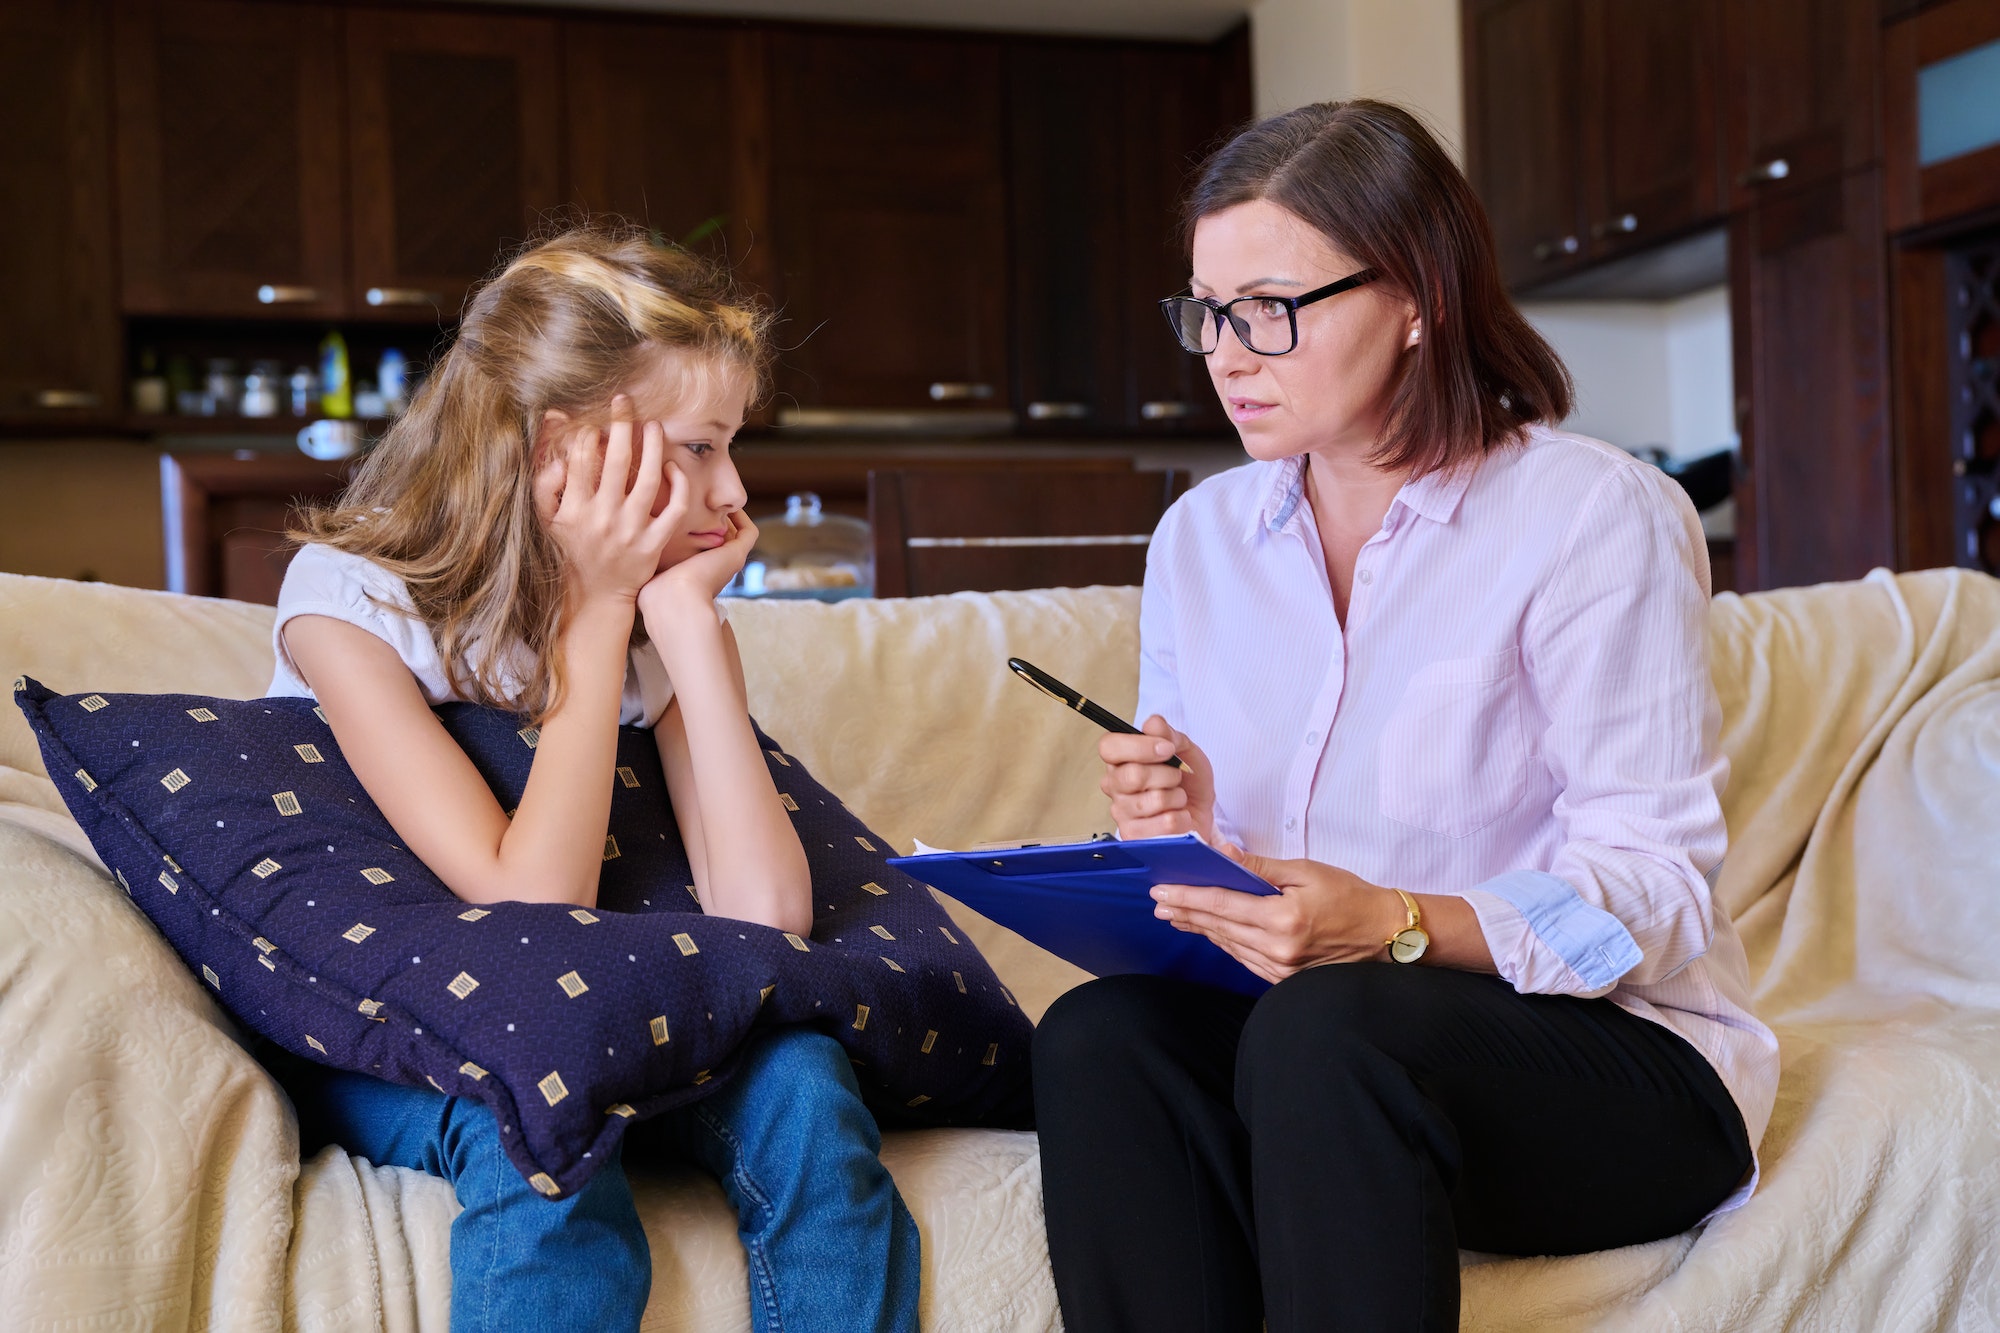 individual-therapy-session-for-child-girl-with-psychologist.jpg